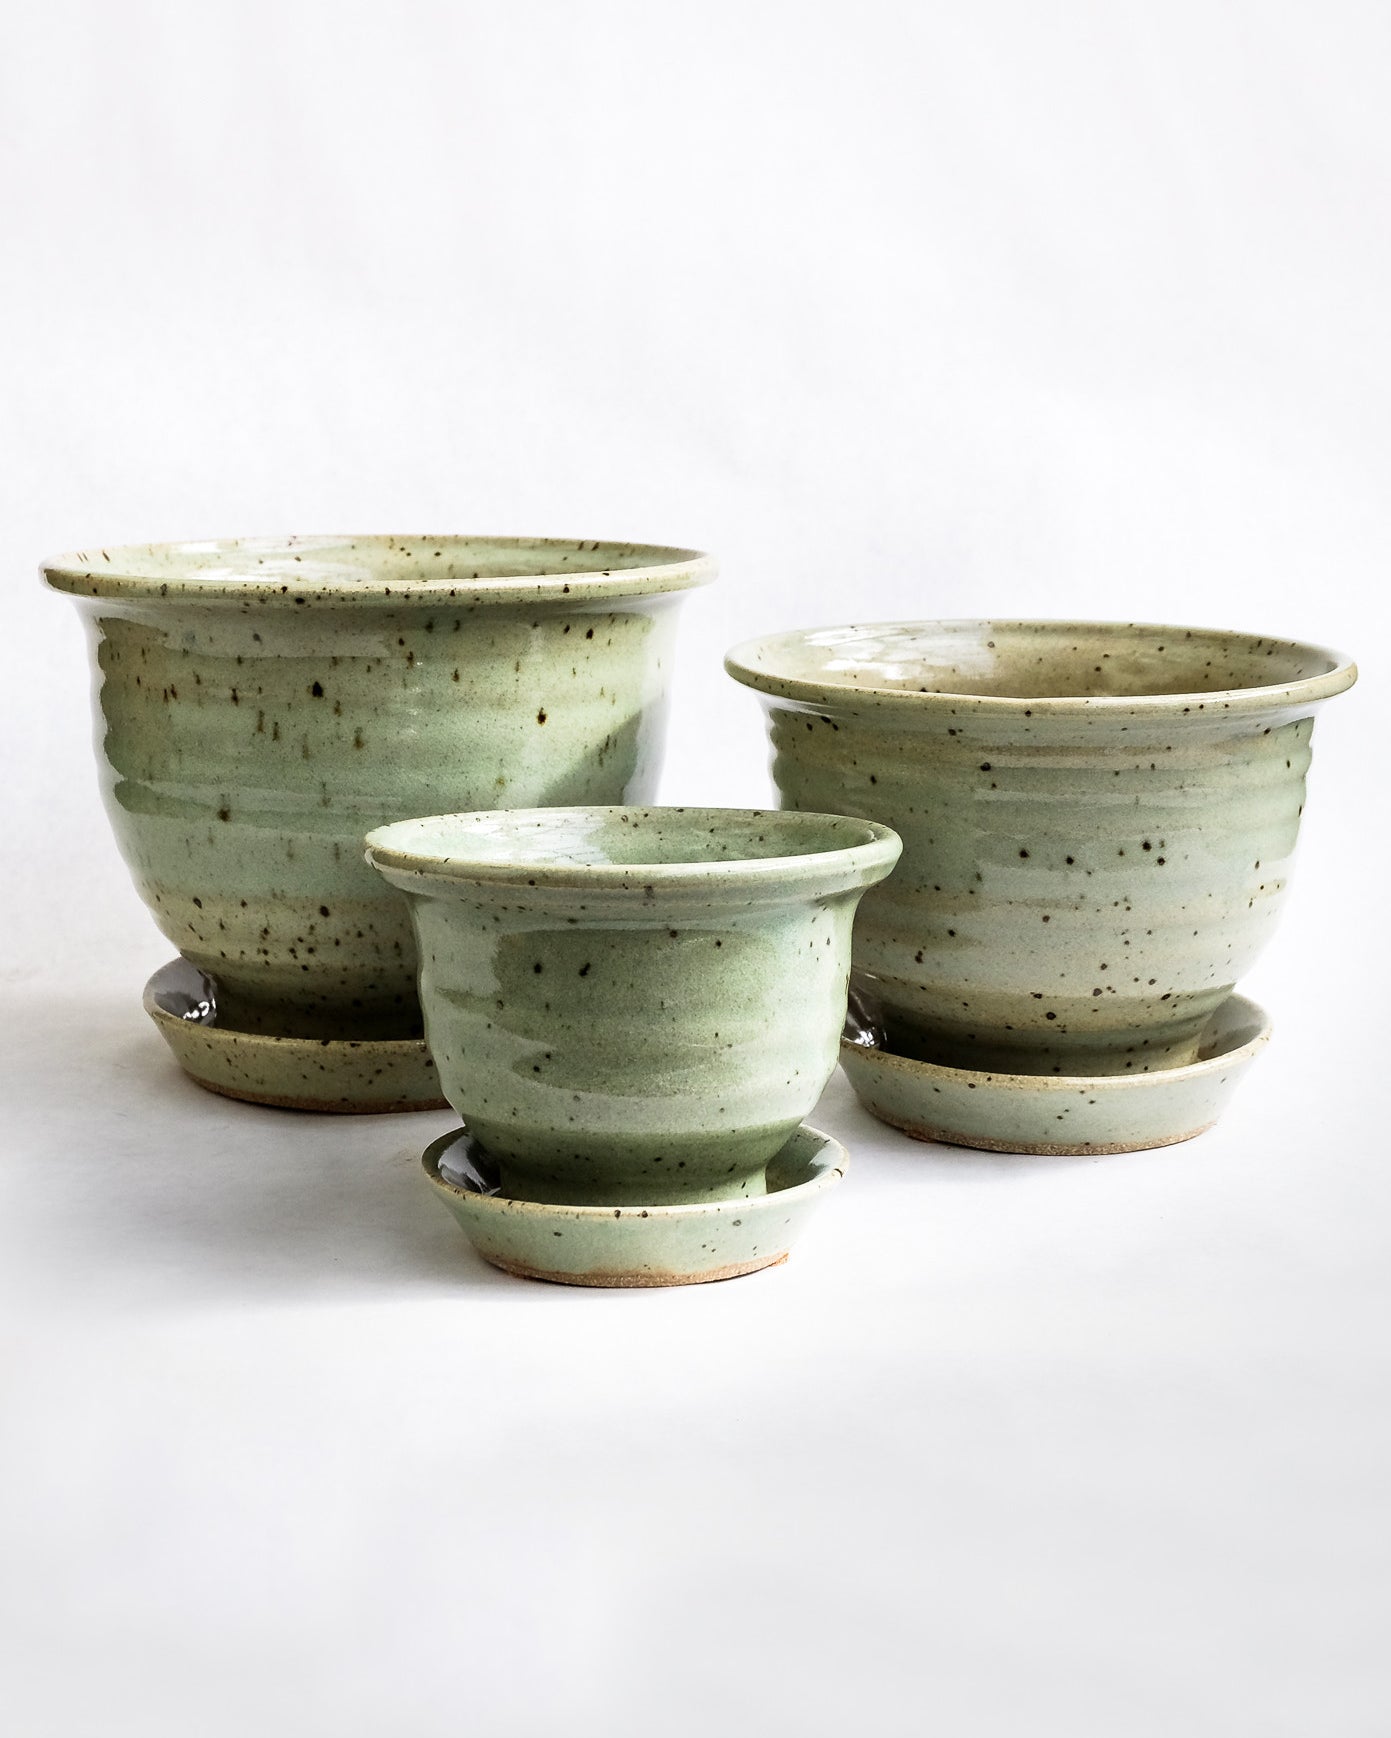 Handcrafted natural green speckled pots with attached drainage tray on white background